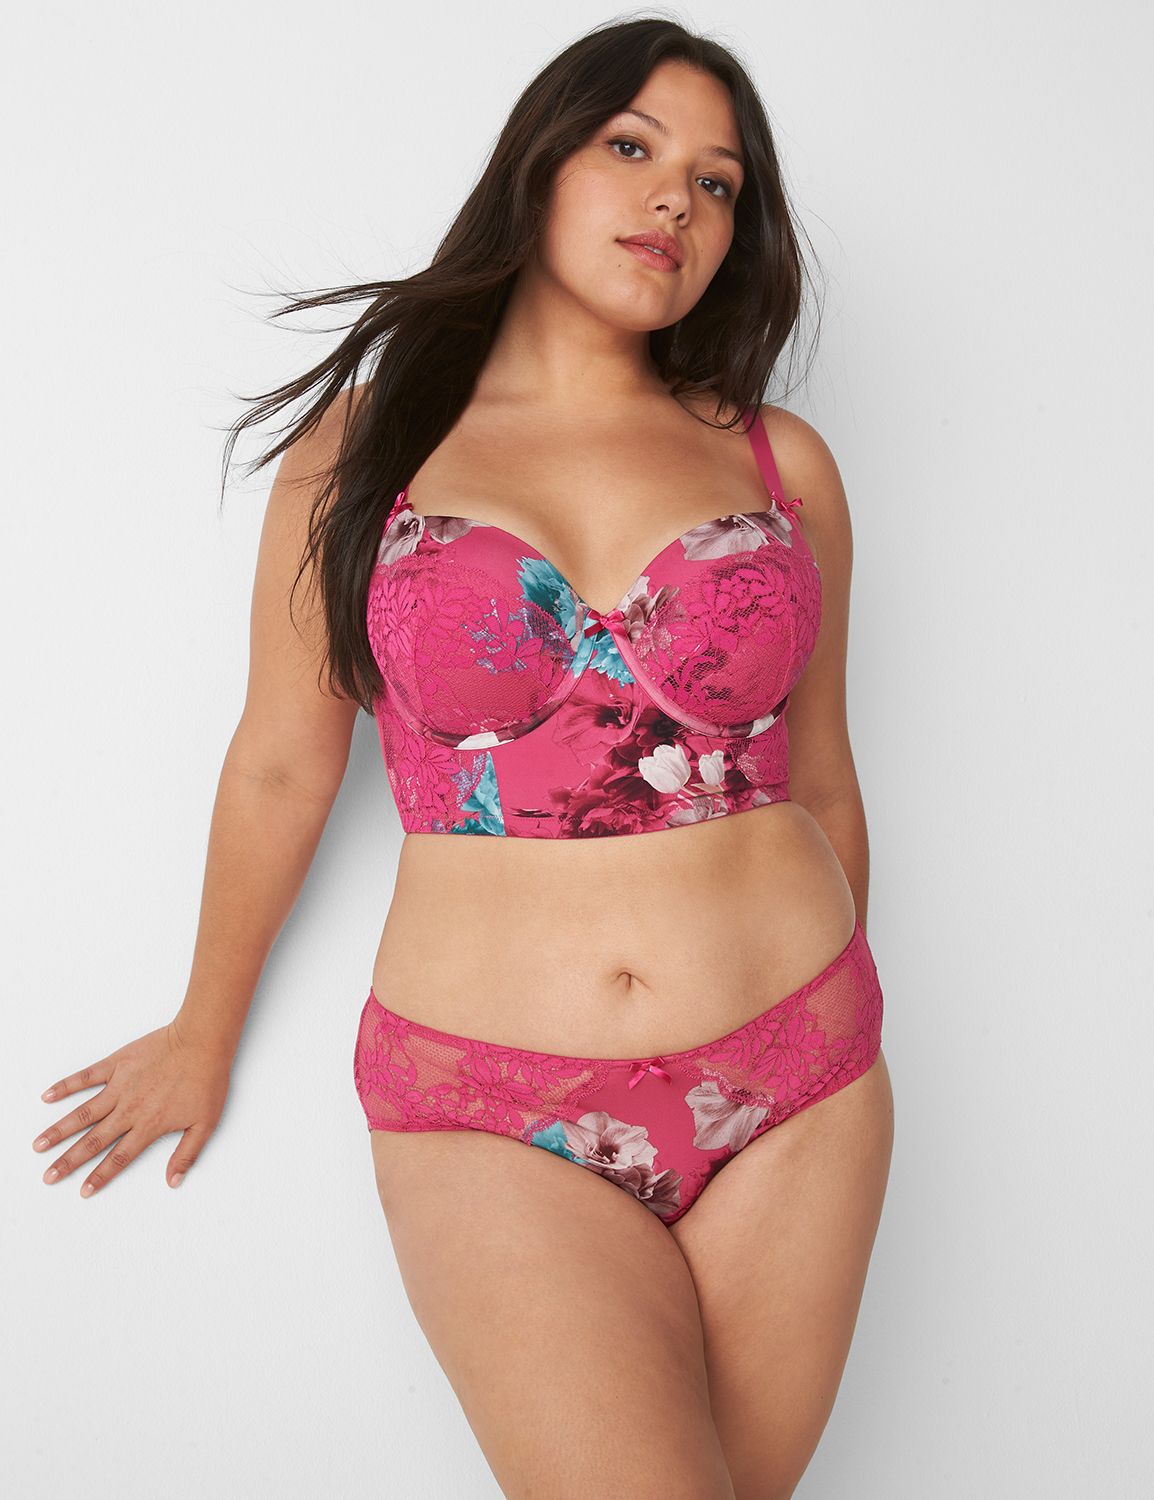 Cacique Lane Bryant Lace Longline Balconette bra sun kissed coral Size  undefined - $29 - From Clintonia